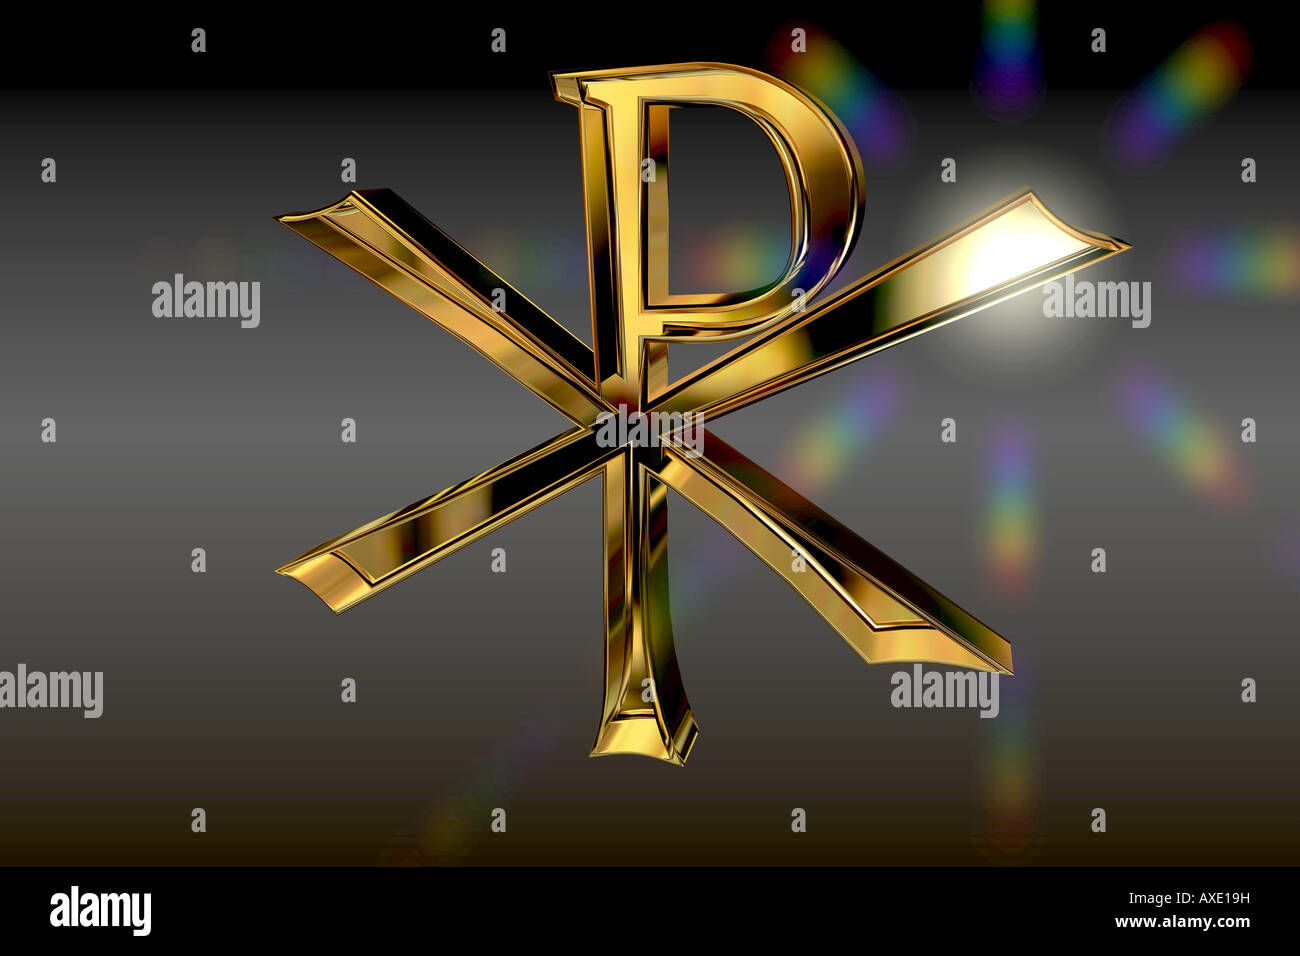 Golden Rendering of an Christian Pax Christi Sign with a rainbow-Lens Flare. Black Background. Stock Photo